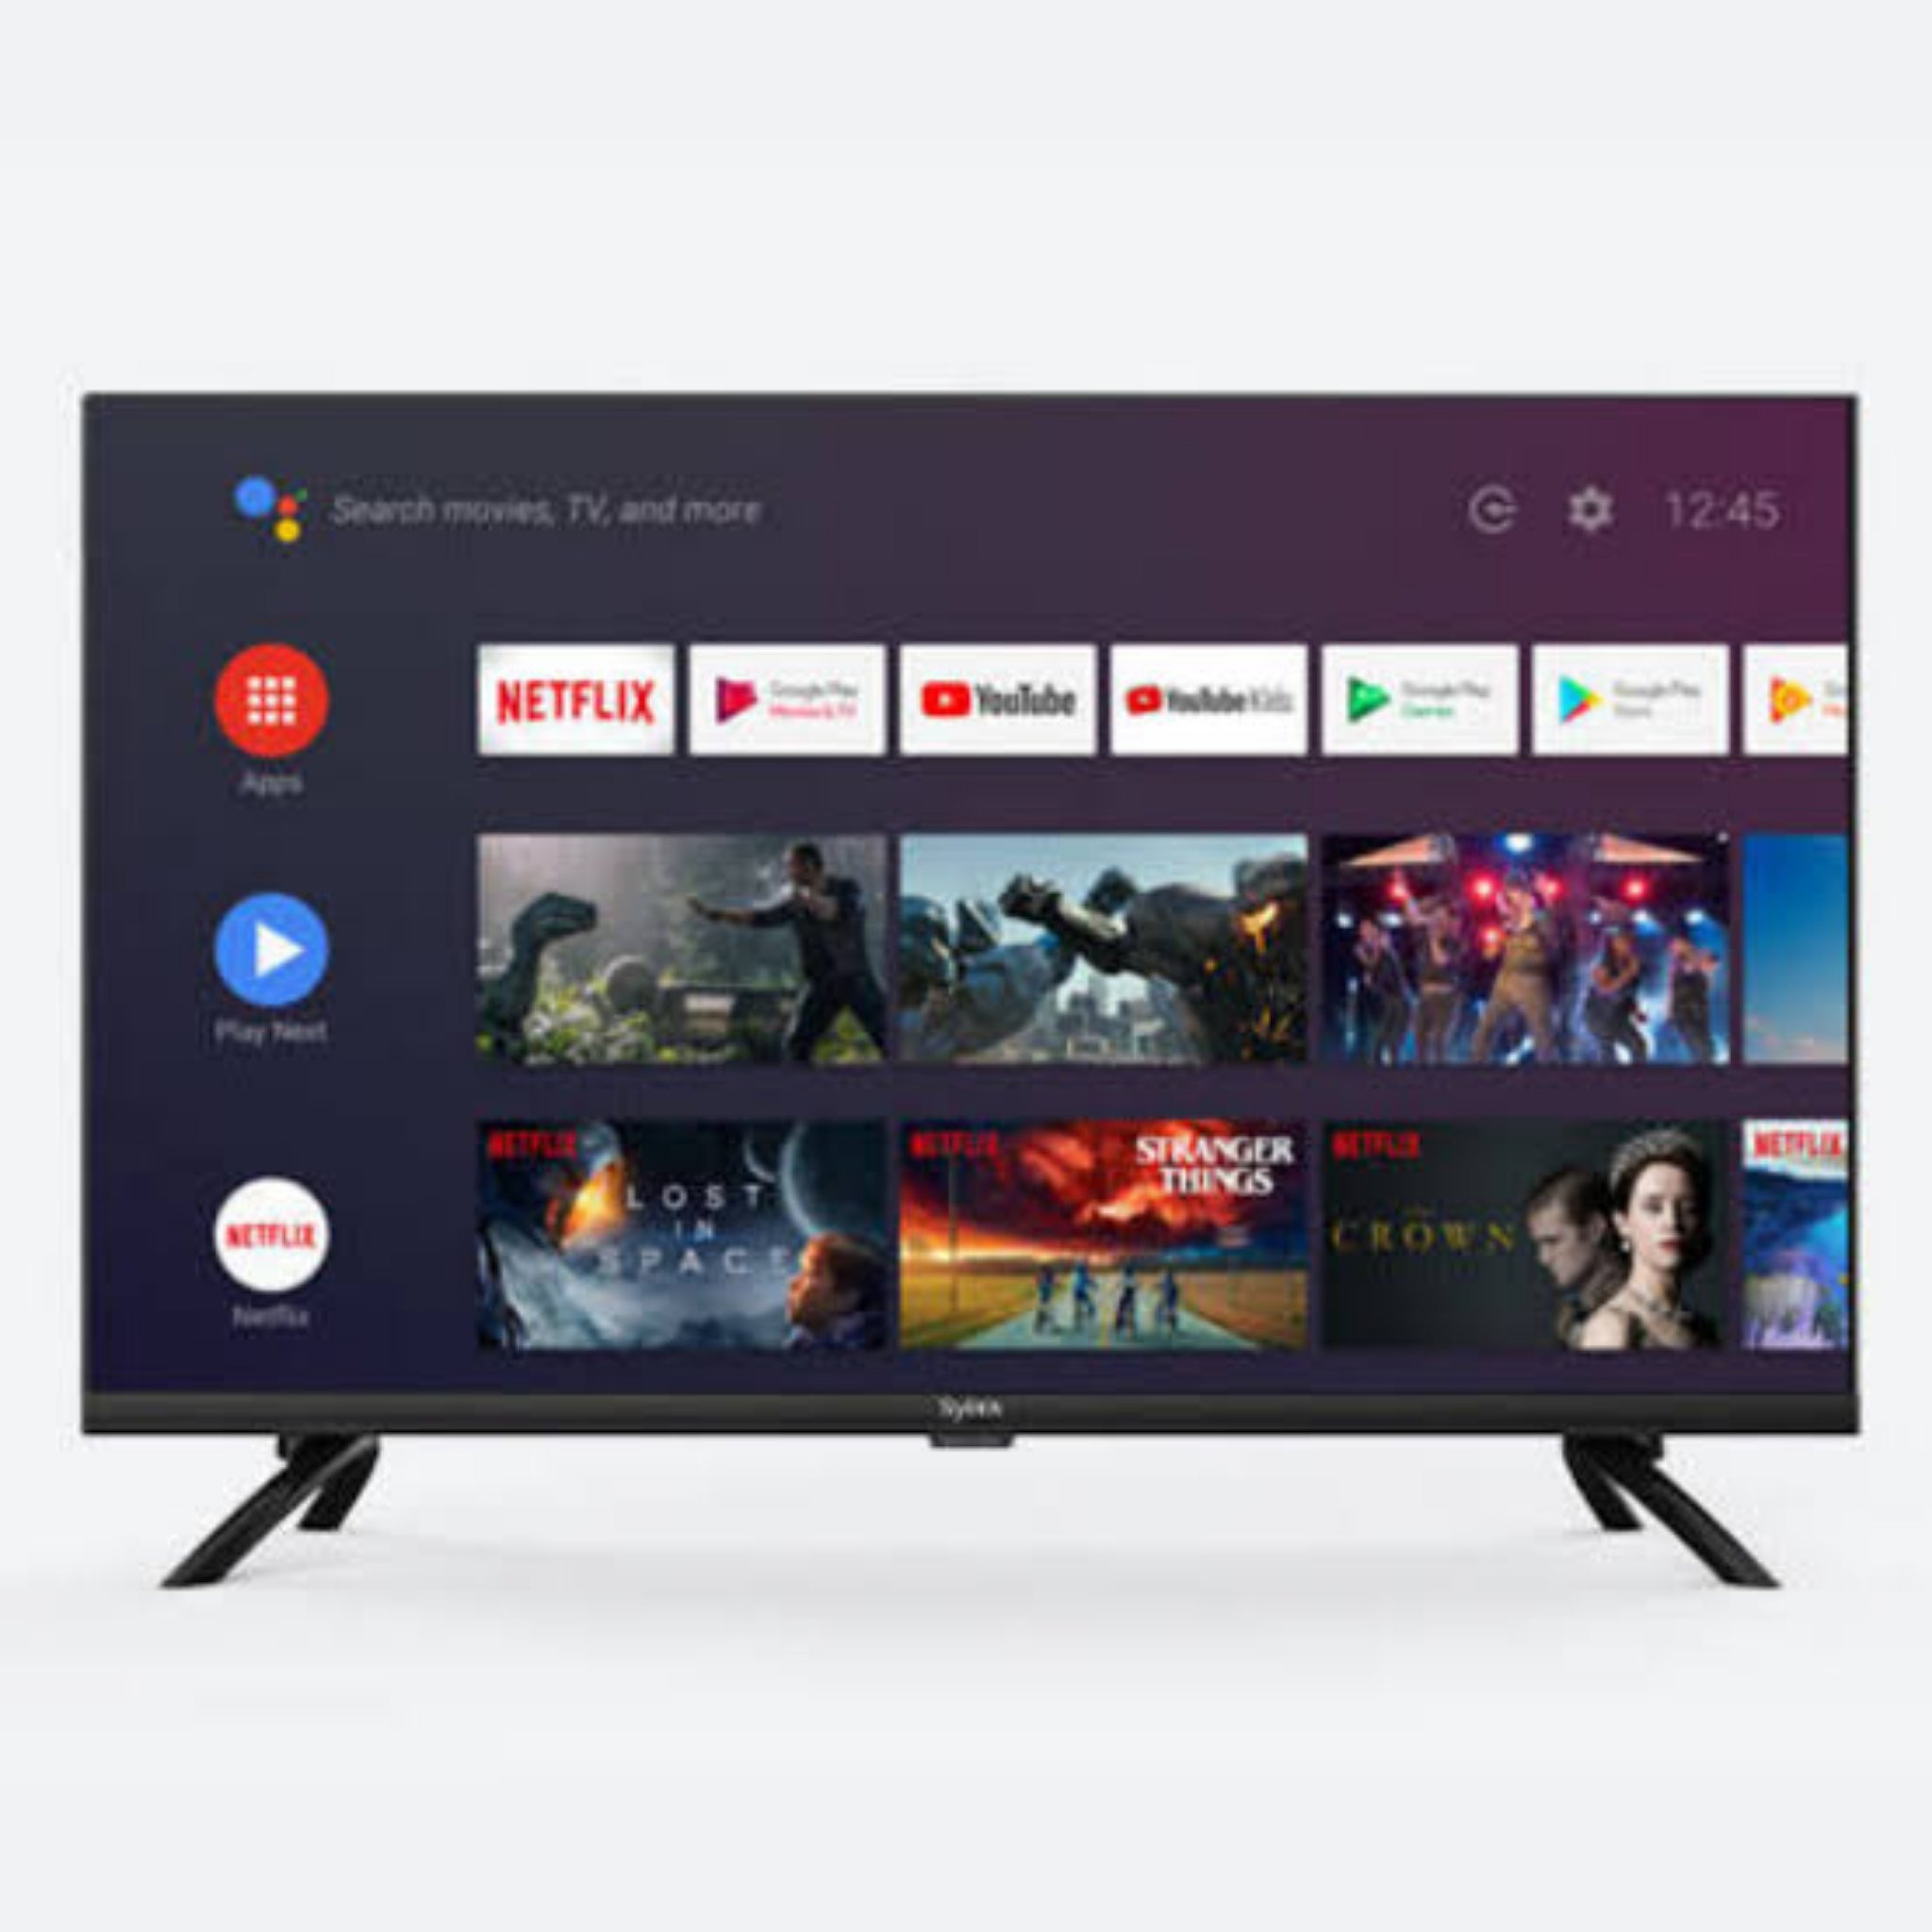 Syinix 43 inch Smart Android FHD Tv